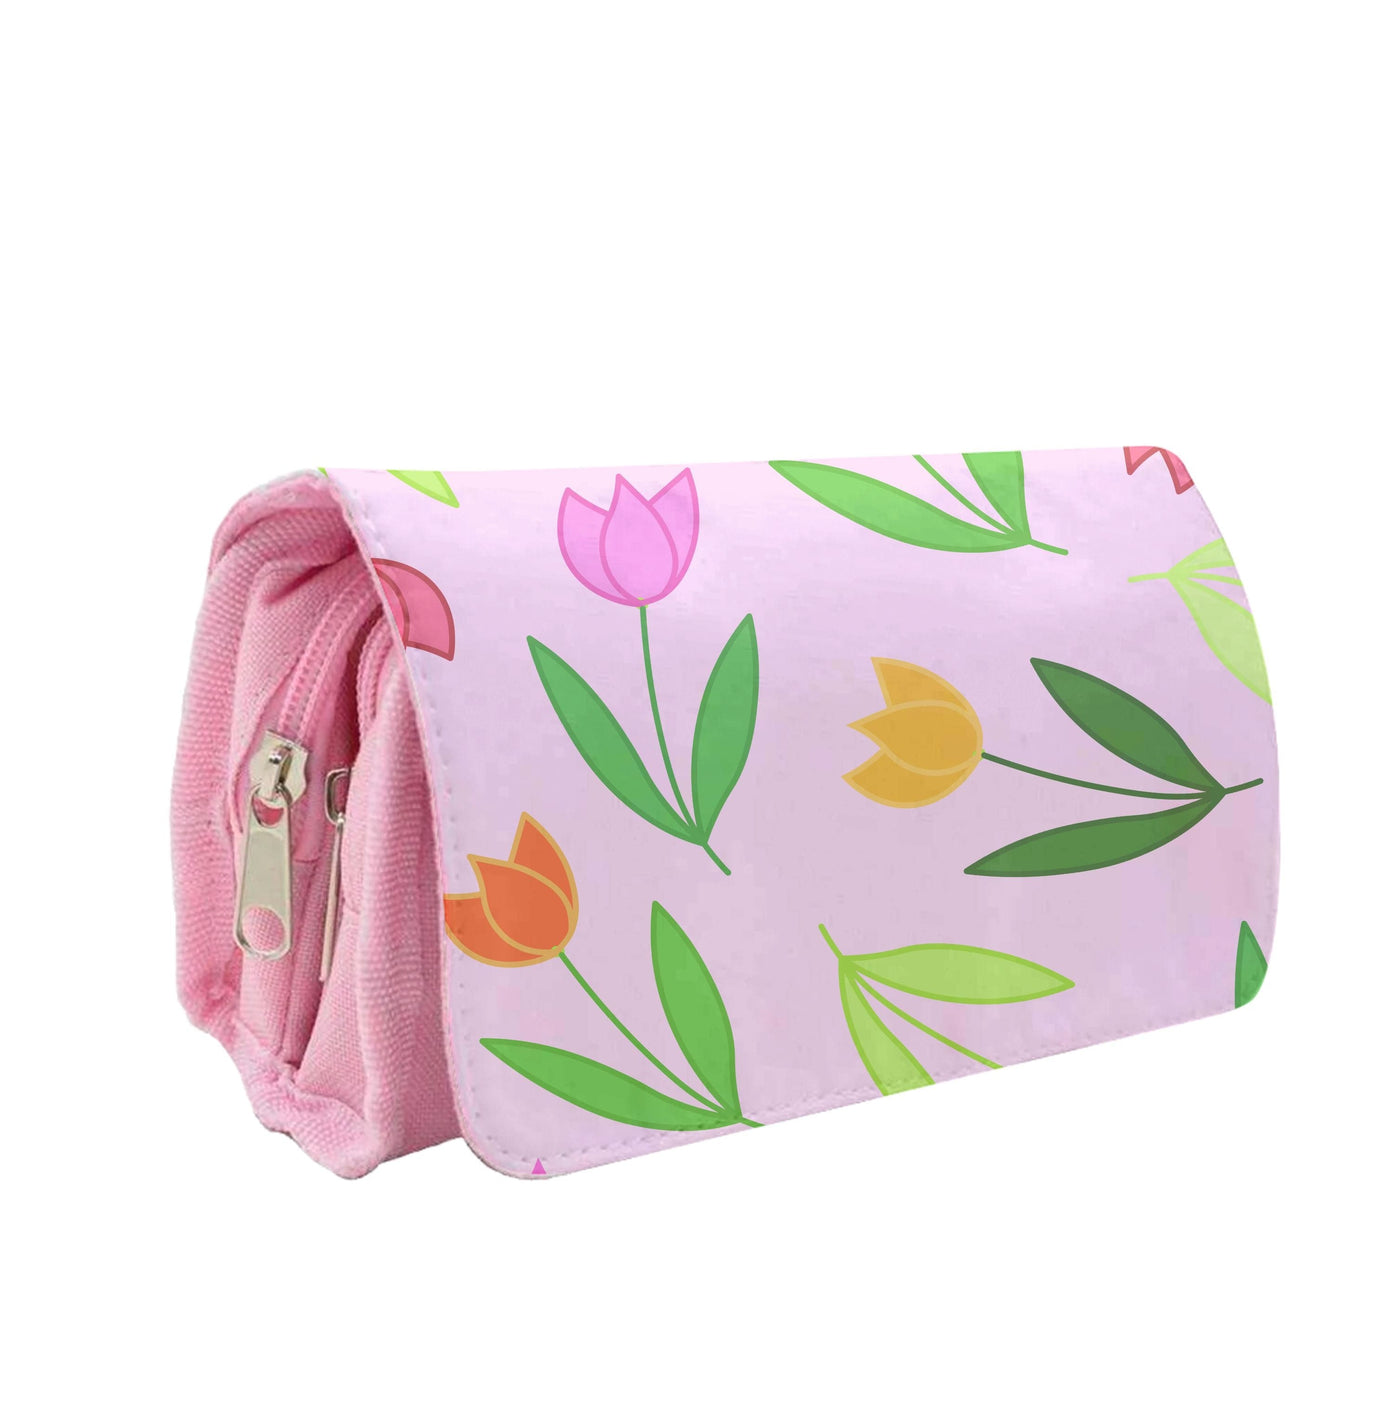 Tulips - Spring Patterns Pencil Case